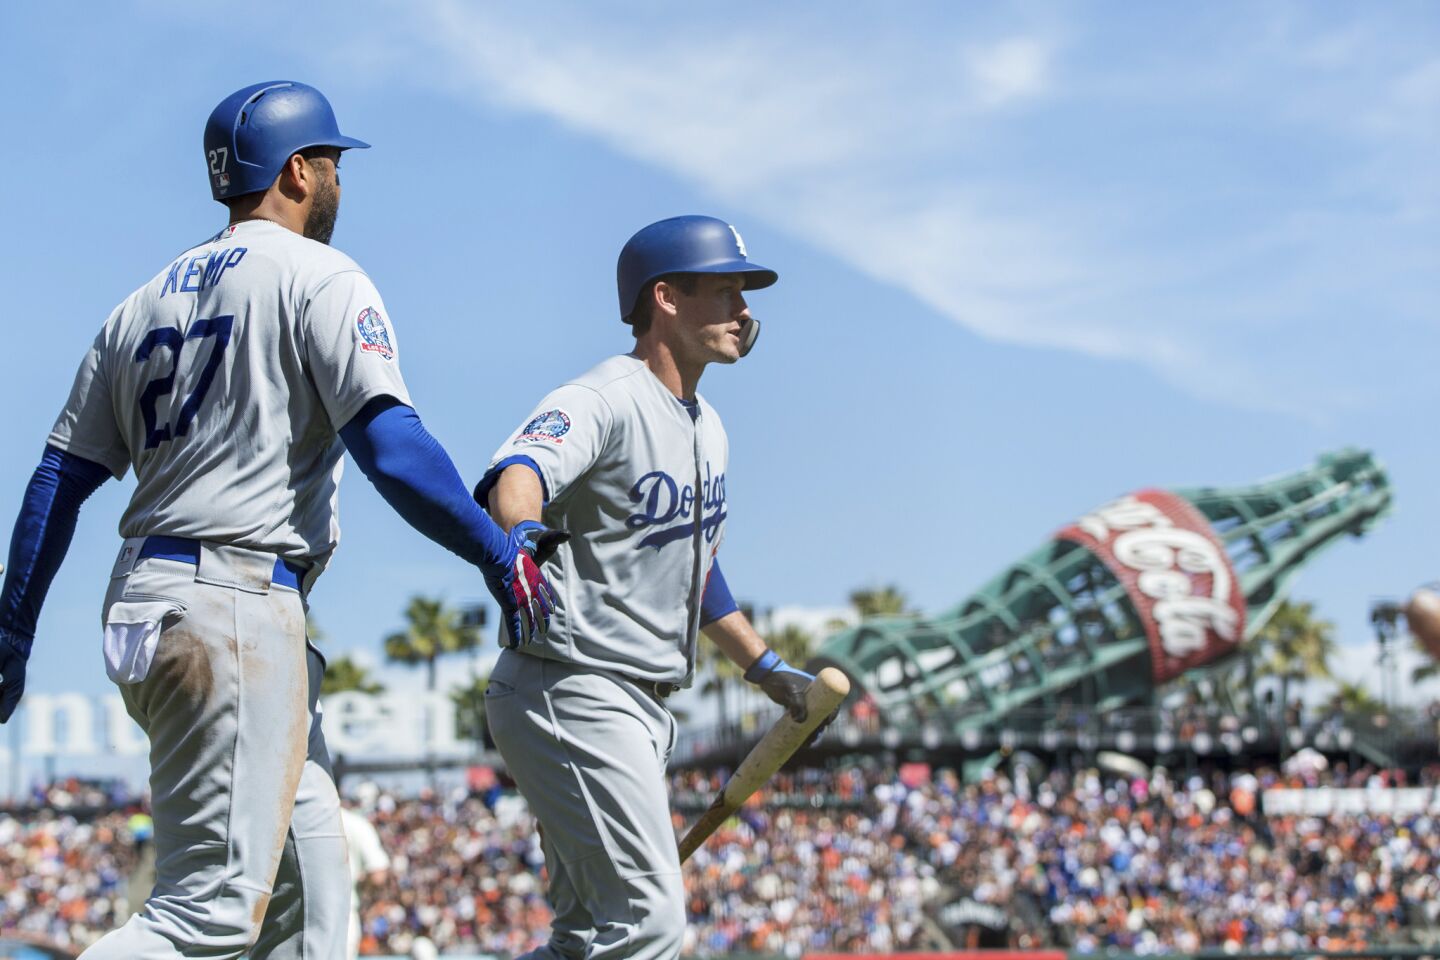 Los Angeles Dodgers Enrique Hernandez, right, celebrates with Matt Kemp after scoring a run against the San Francisco Giants in the third inning of a baseball game in San Francisco, Sunday, Sept. 30, 2018.